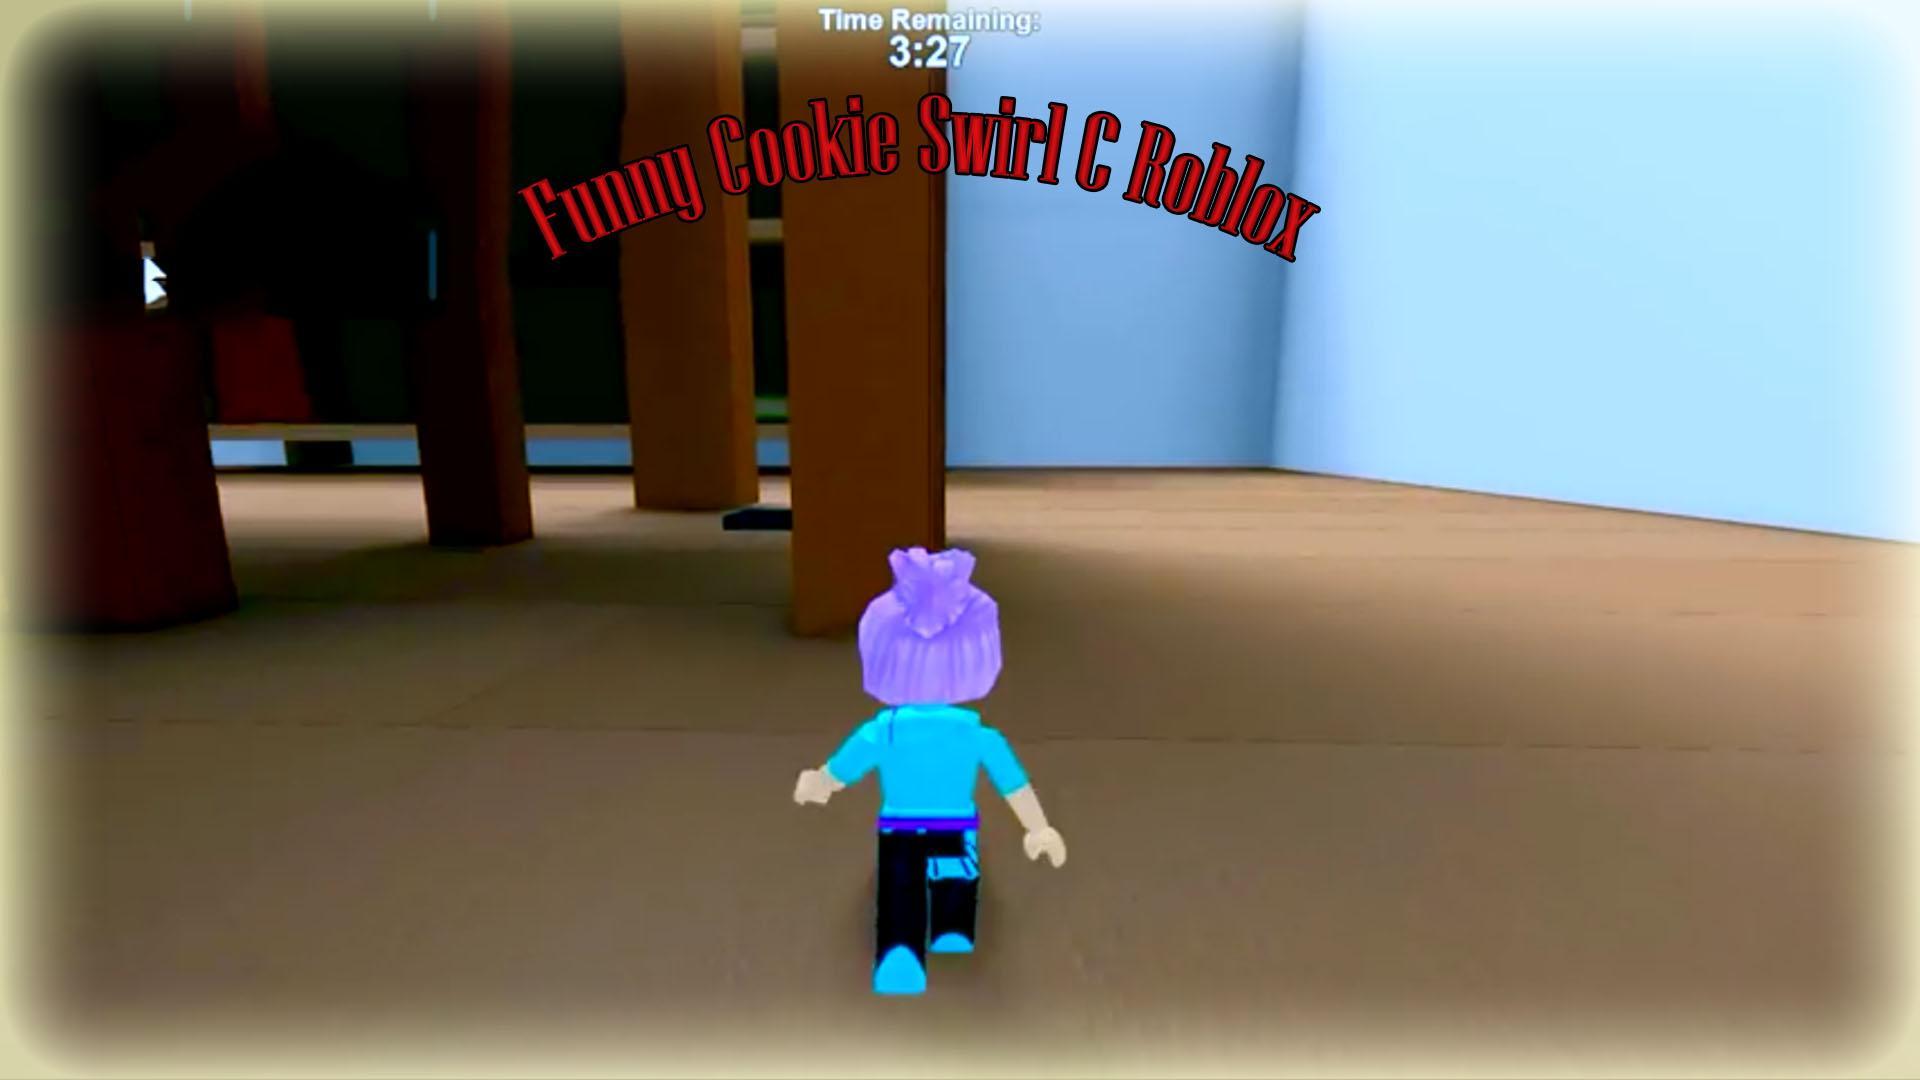 Tips For Cookie Swirl C Funny Roblox Pro Guide For Android Apk Download - tips cookie swirl c roblox 1 1 0 apk com bestips guide